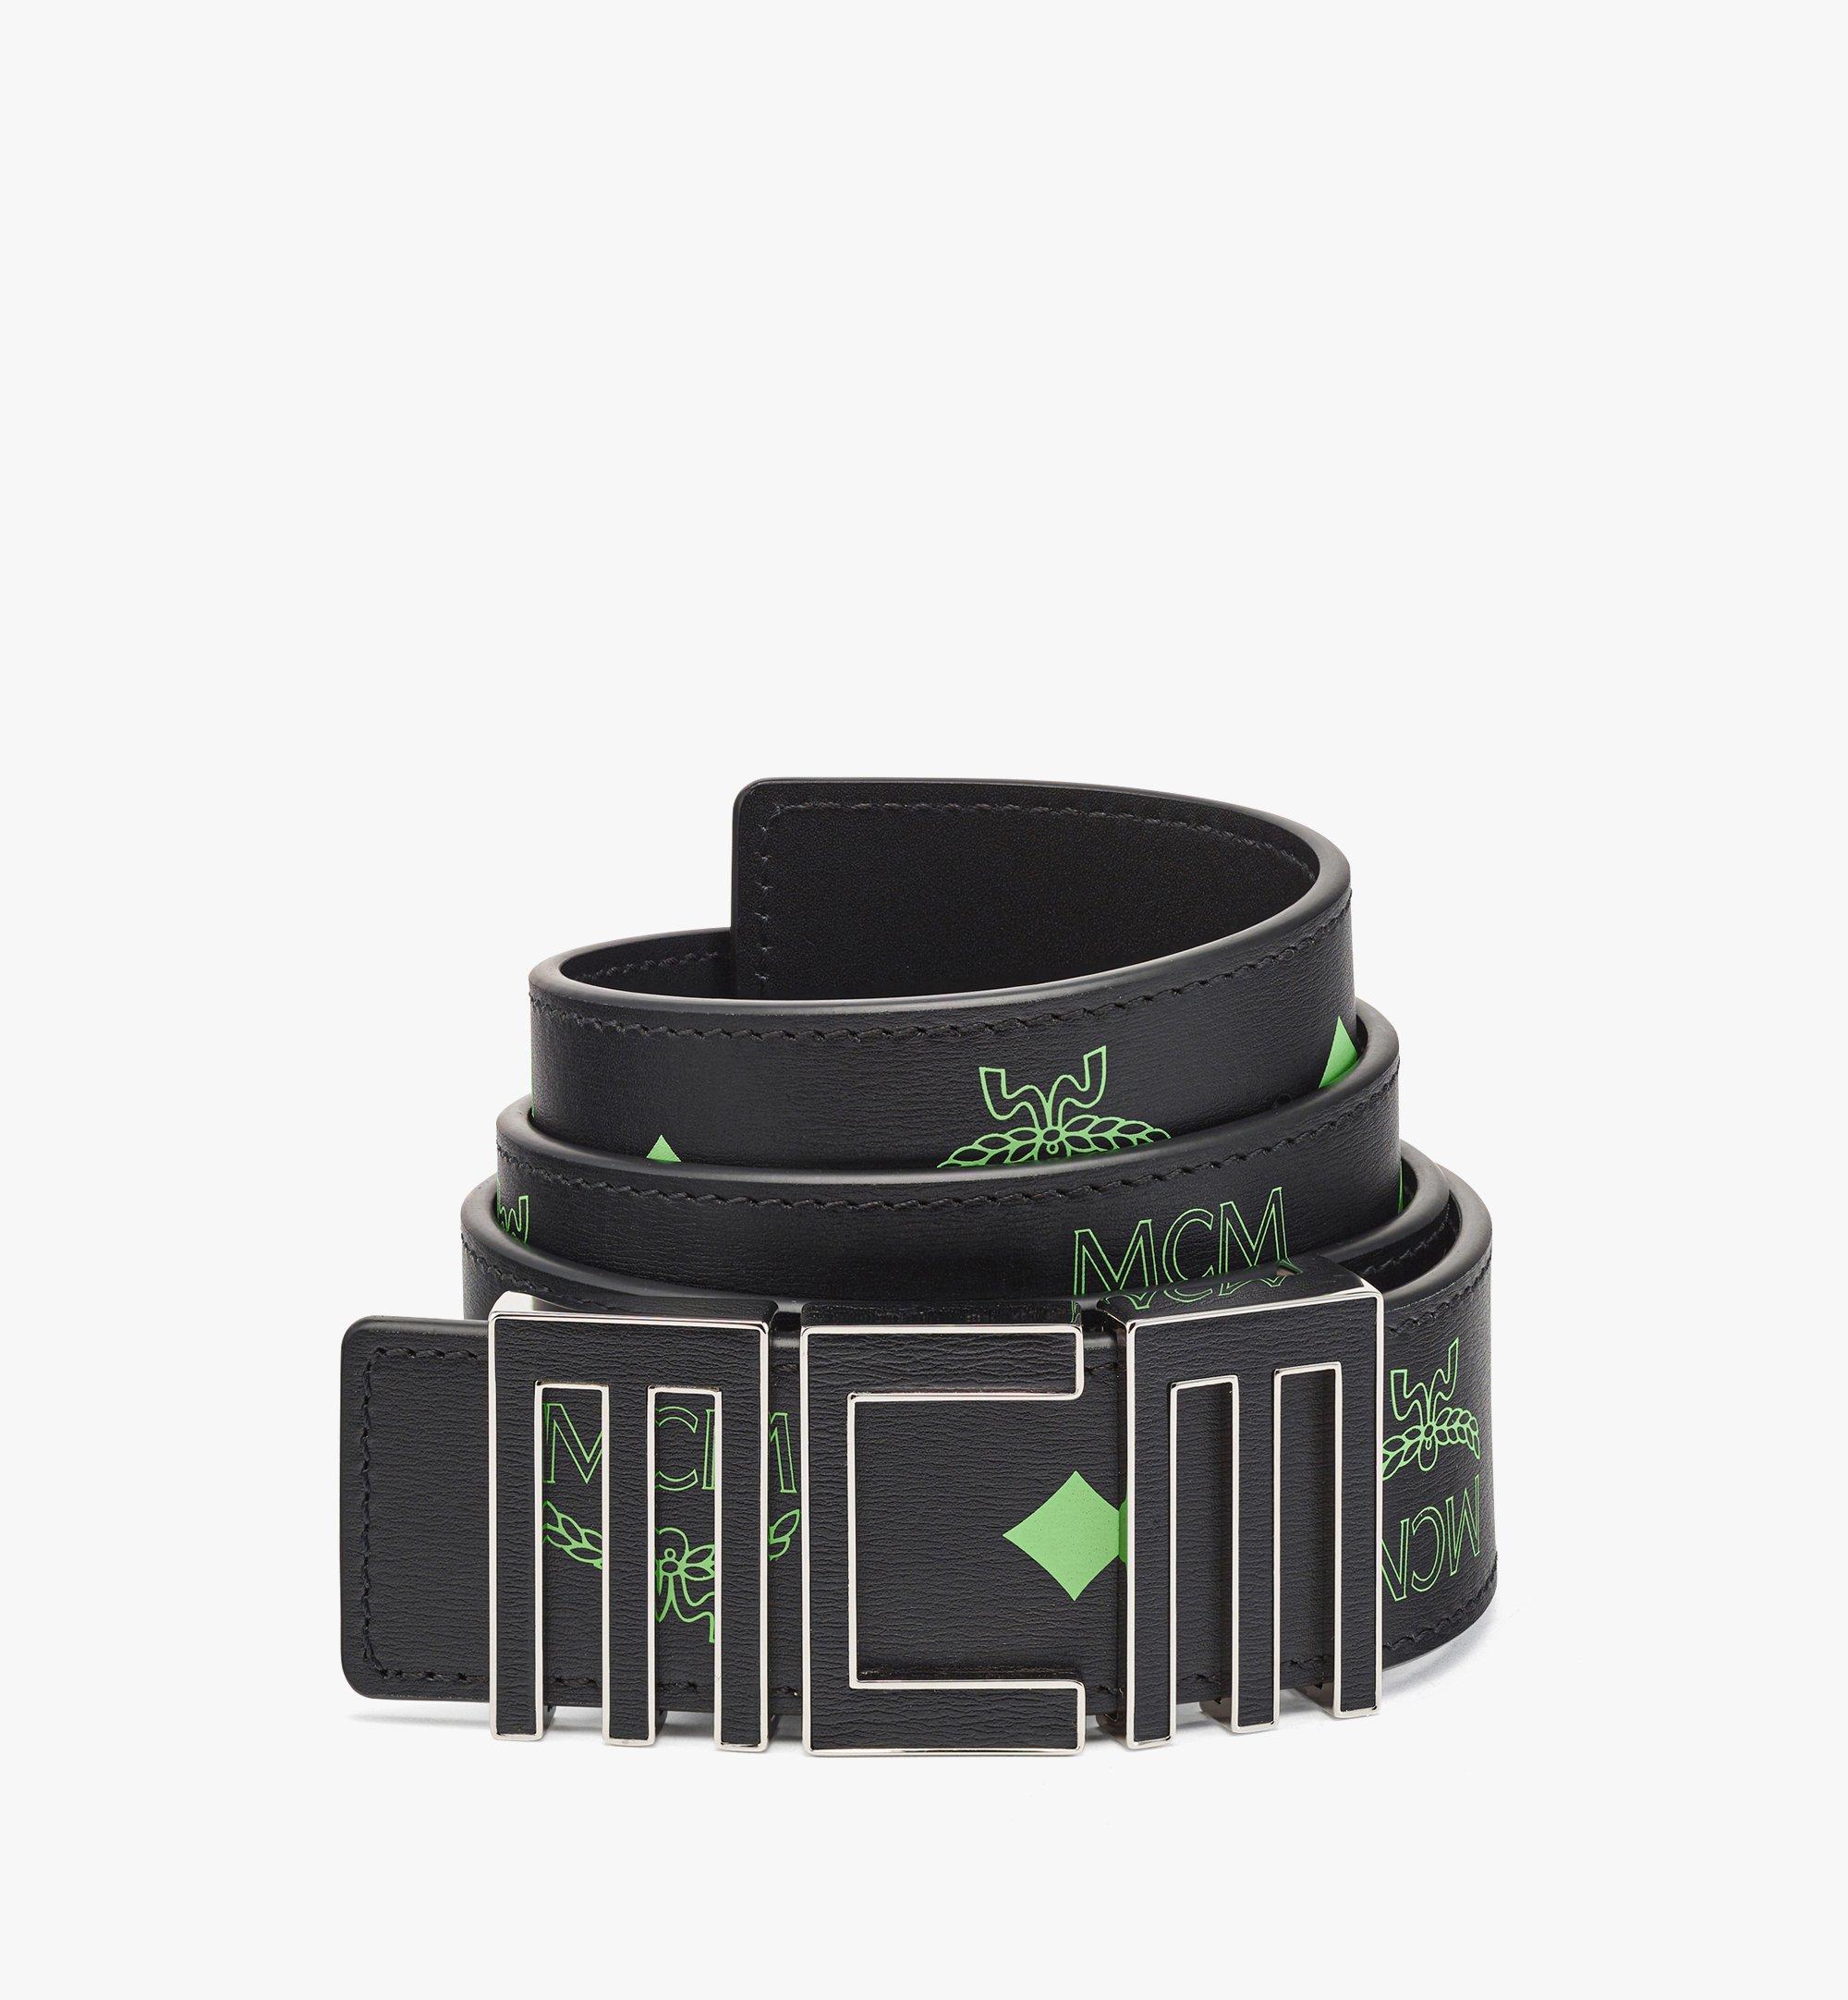 MCM Leather Inlay Tech MCM Reversible Belt 1.5” in Embossed Leather Green MXBCSTC03JW110 Alternate View 1